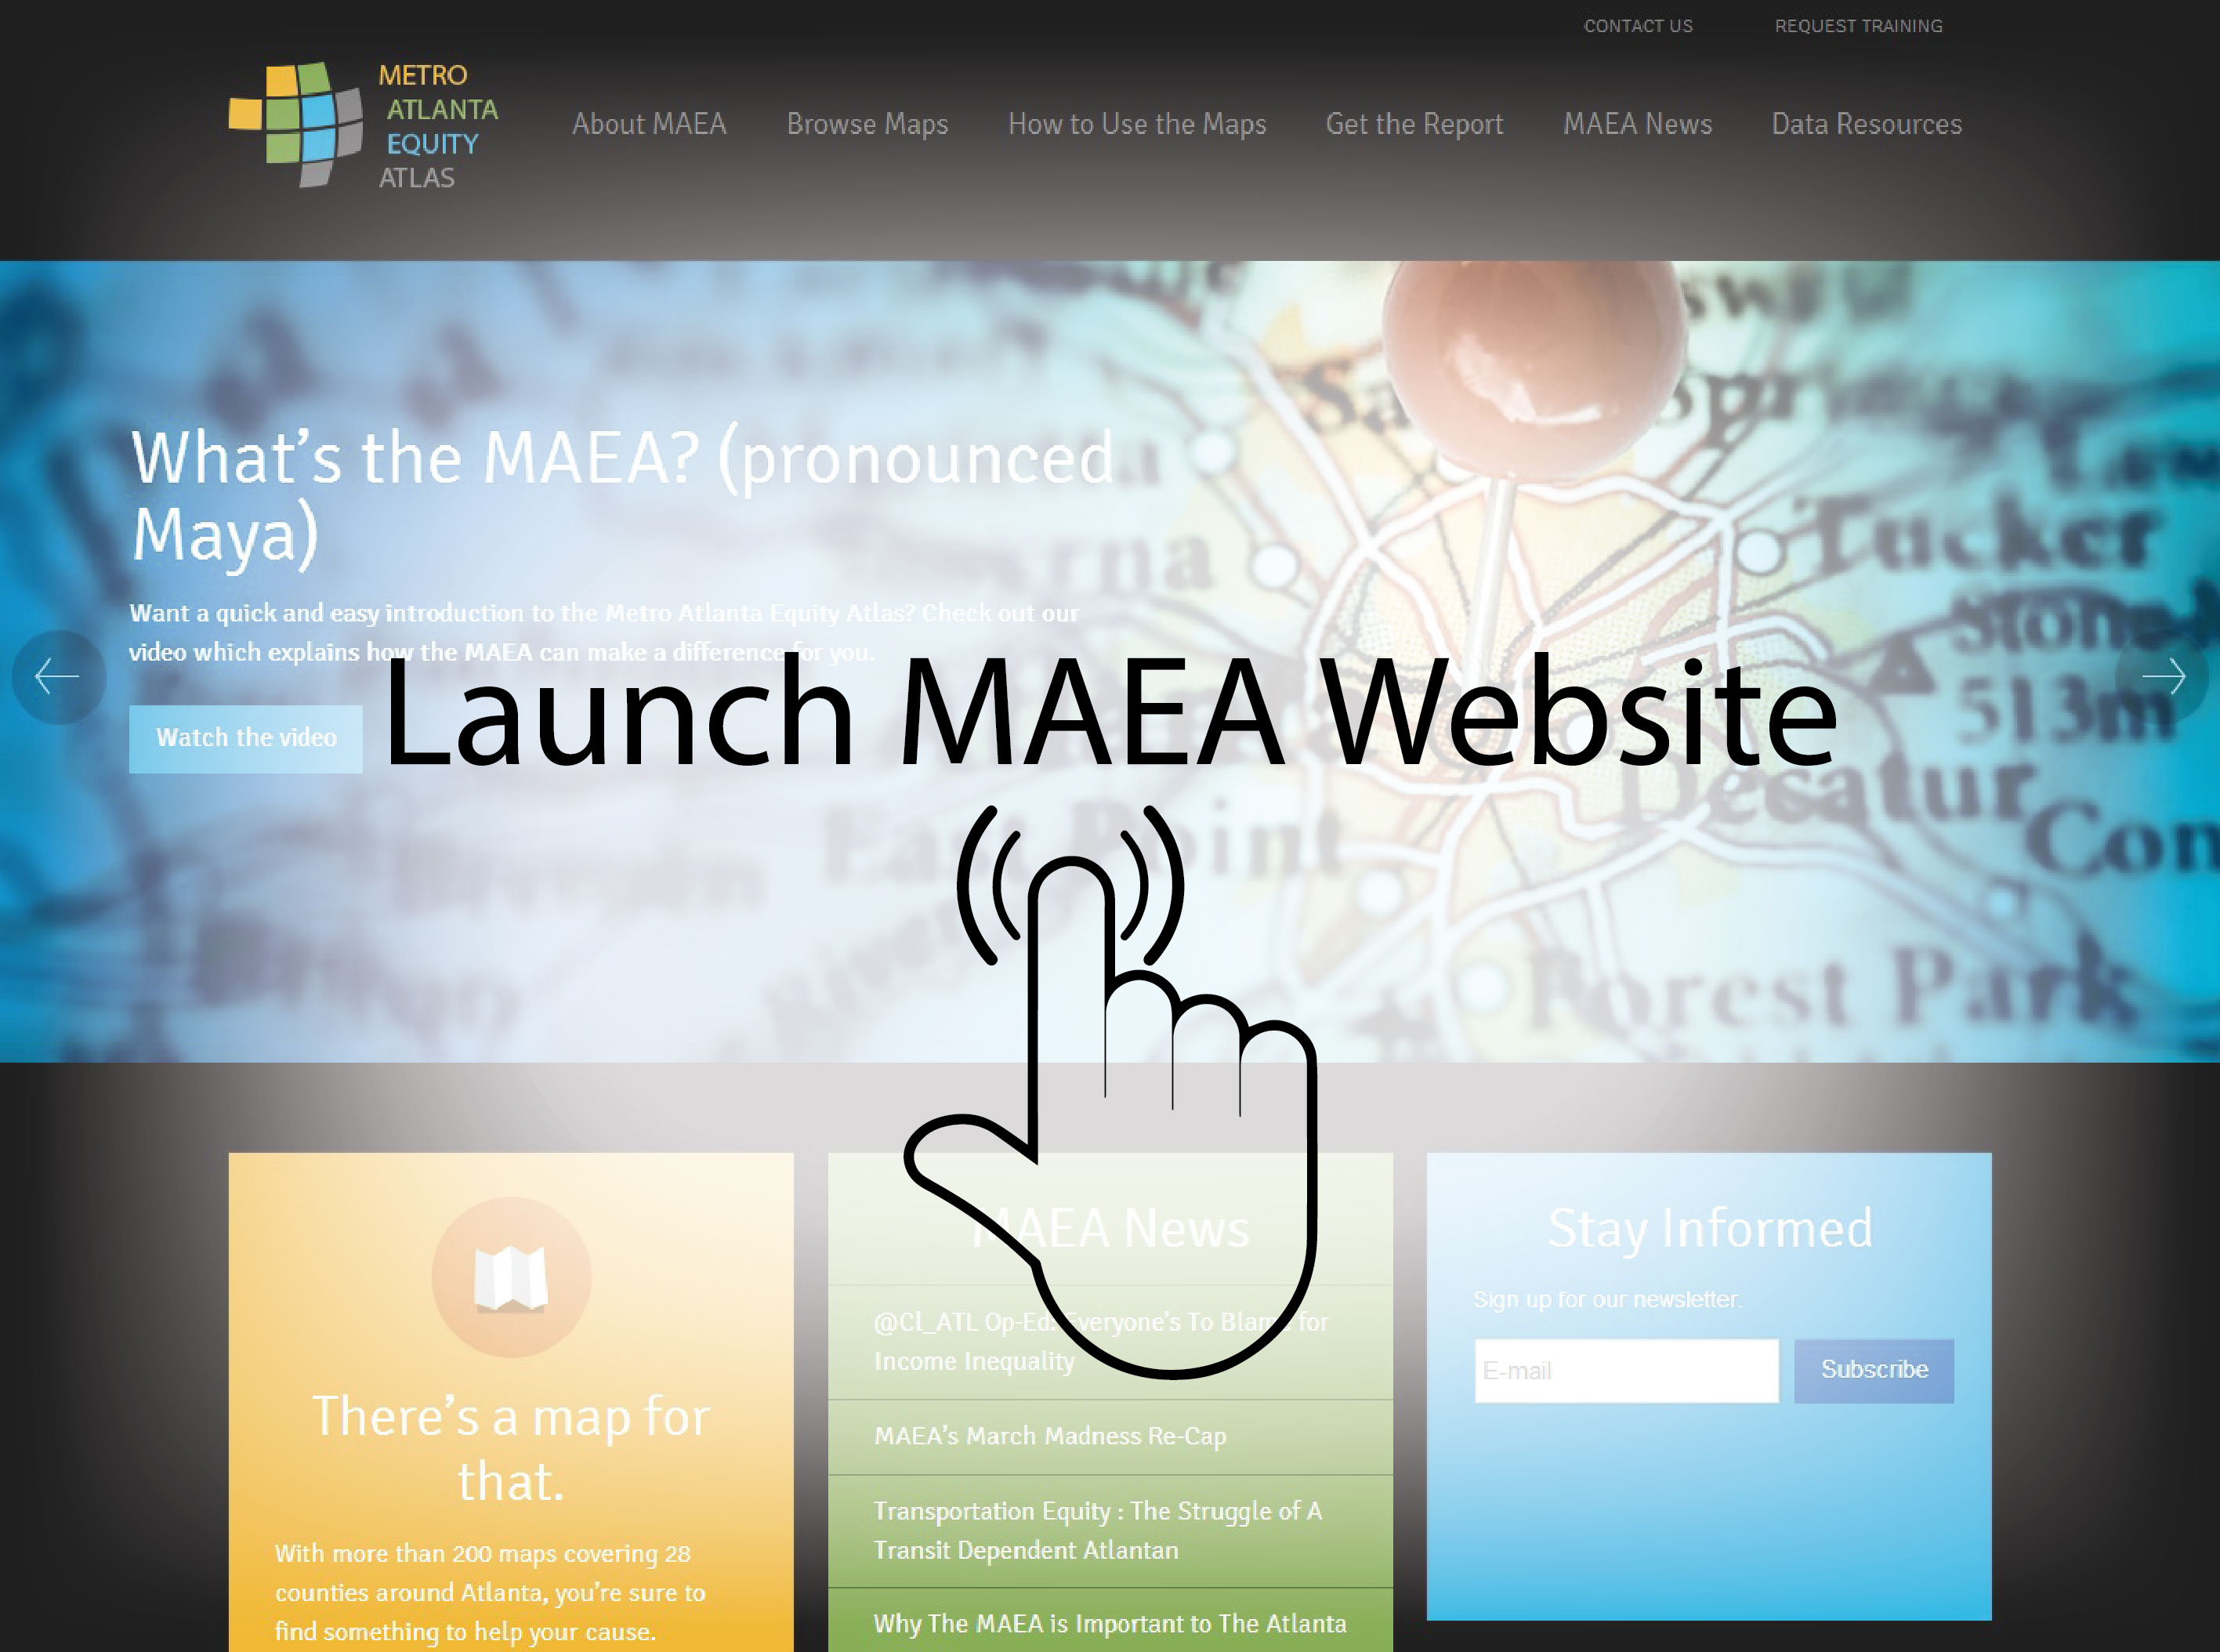 MAEA Featured on Federal Reserve Bank of Atlanta Website as Online Tool to Aid Policymakers